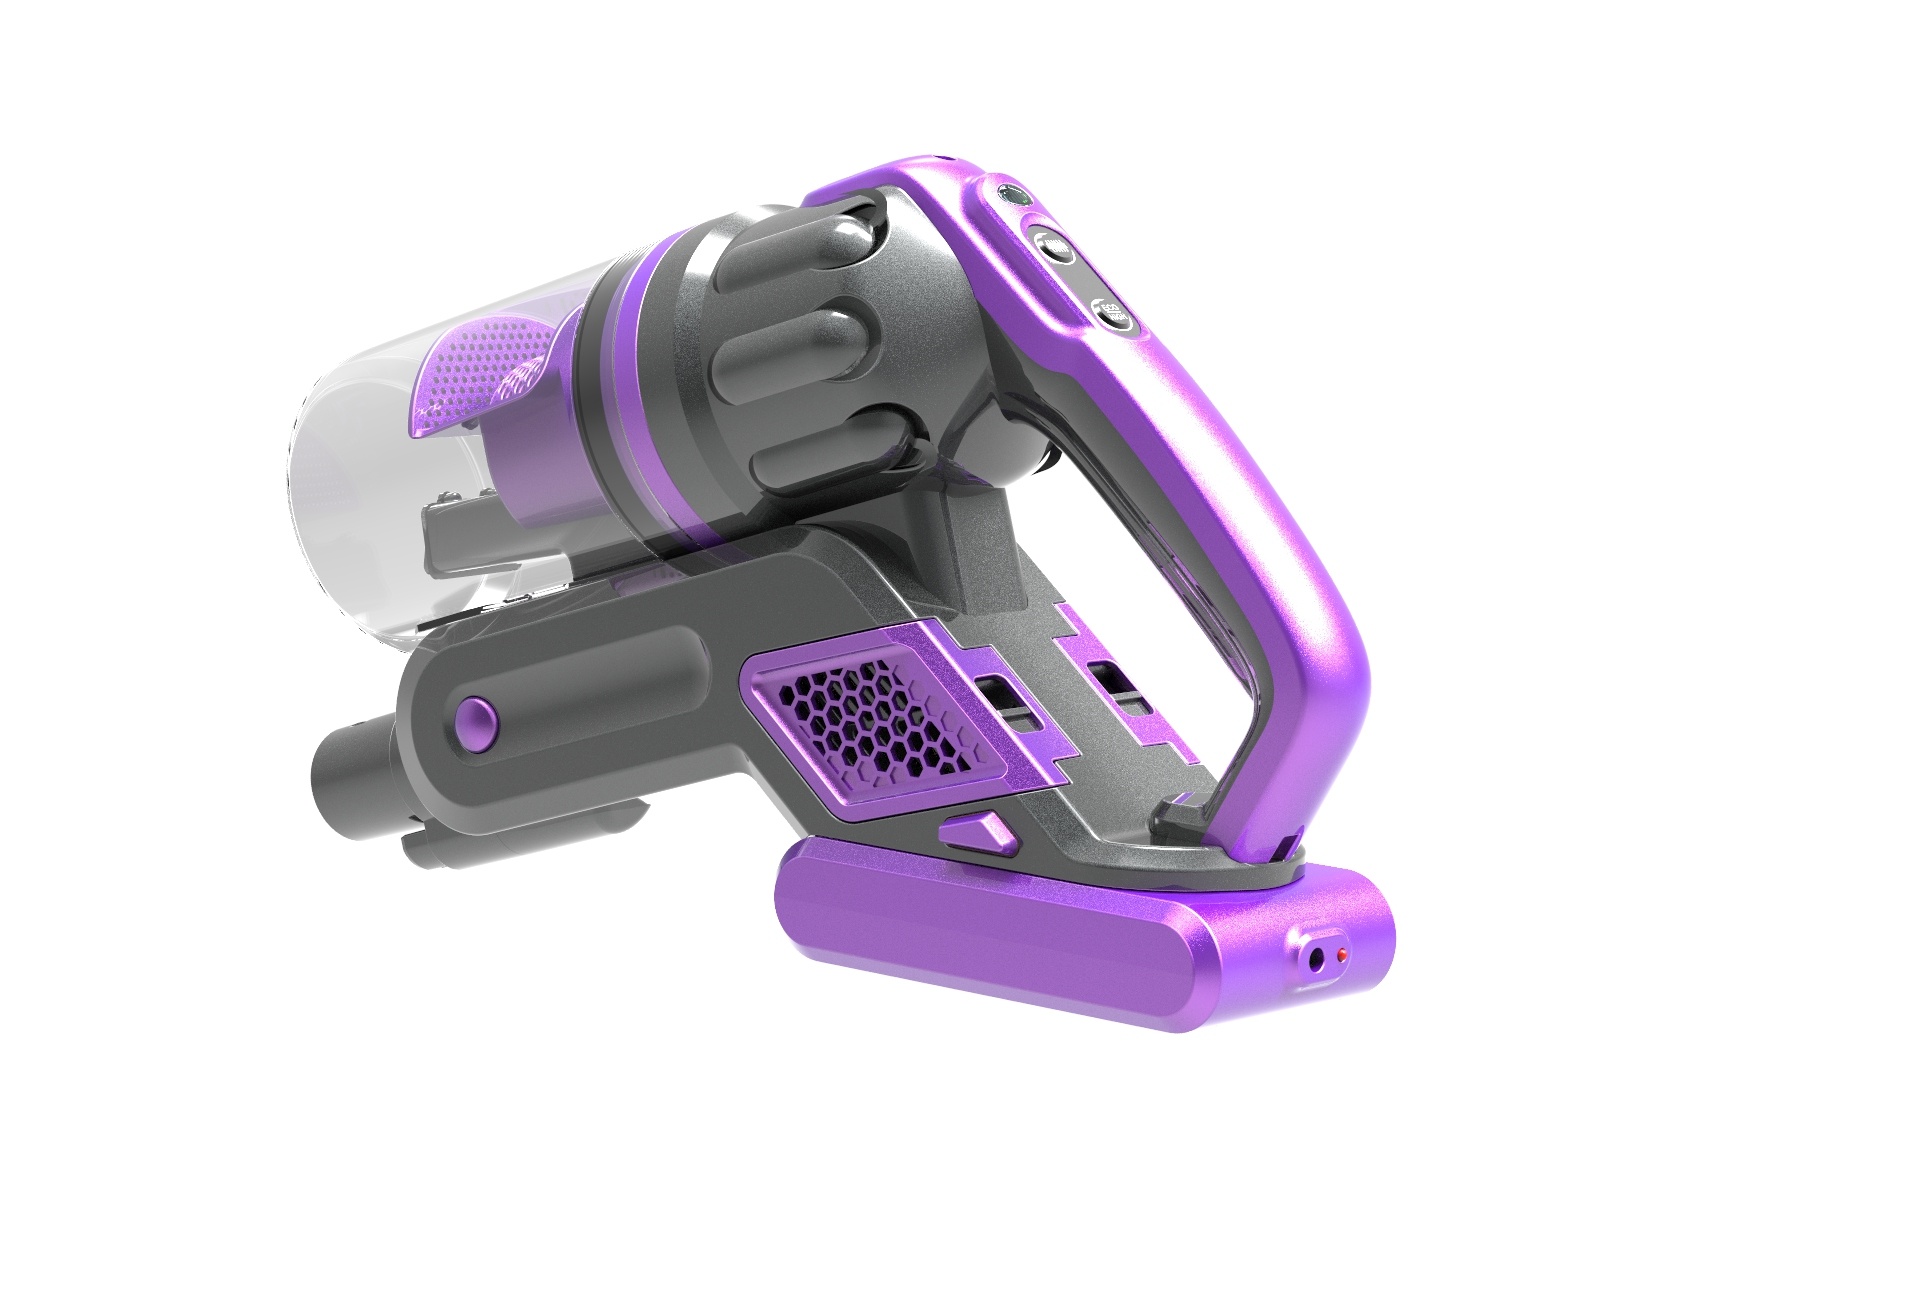 Newest-Cordless-Vacuum-Cleaner-for-Home-Clean (1)